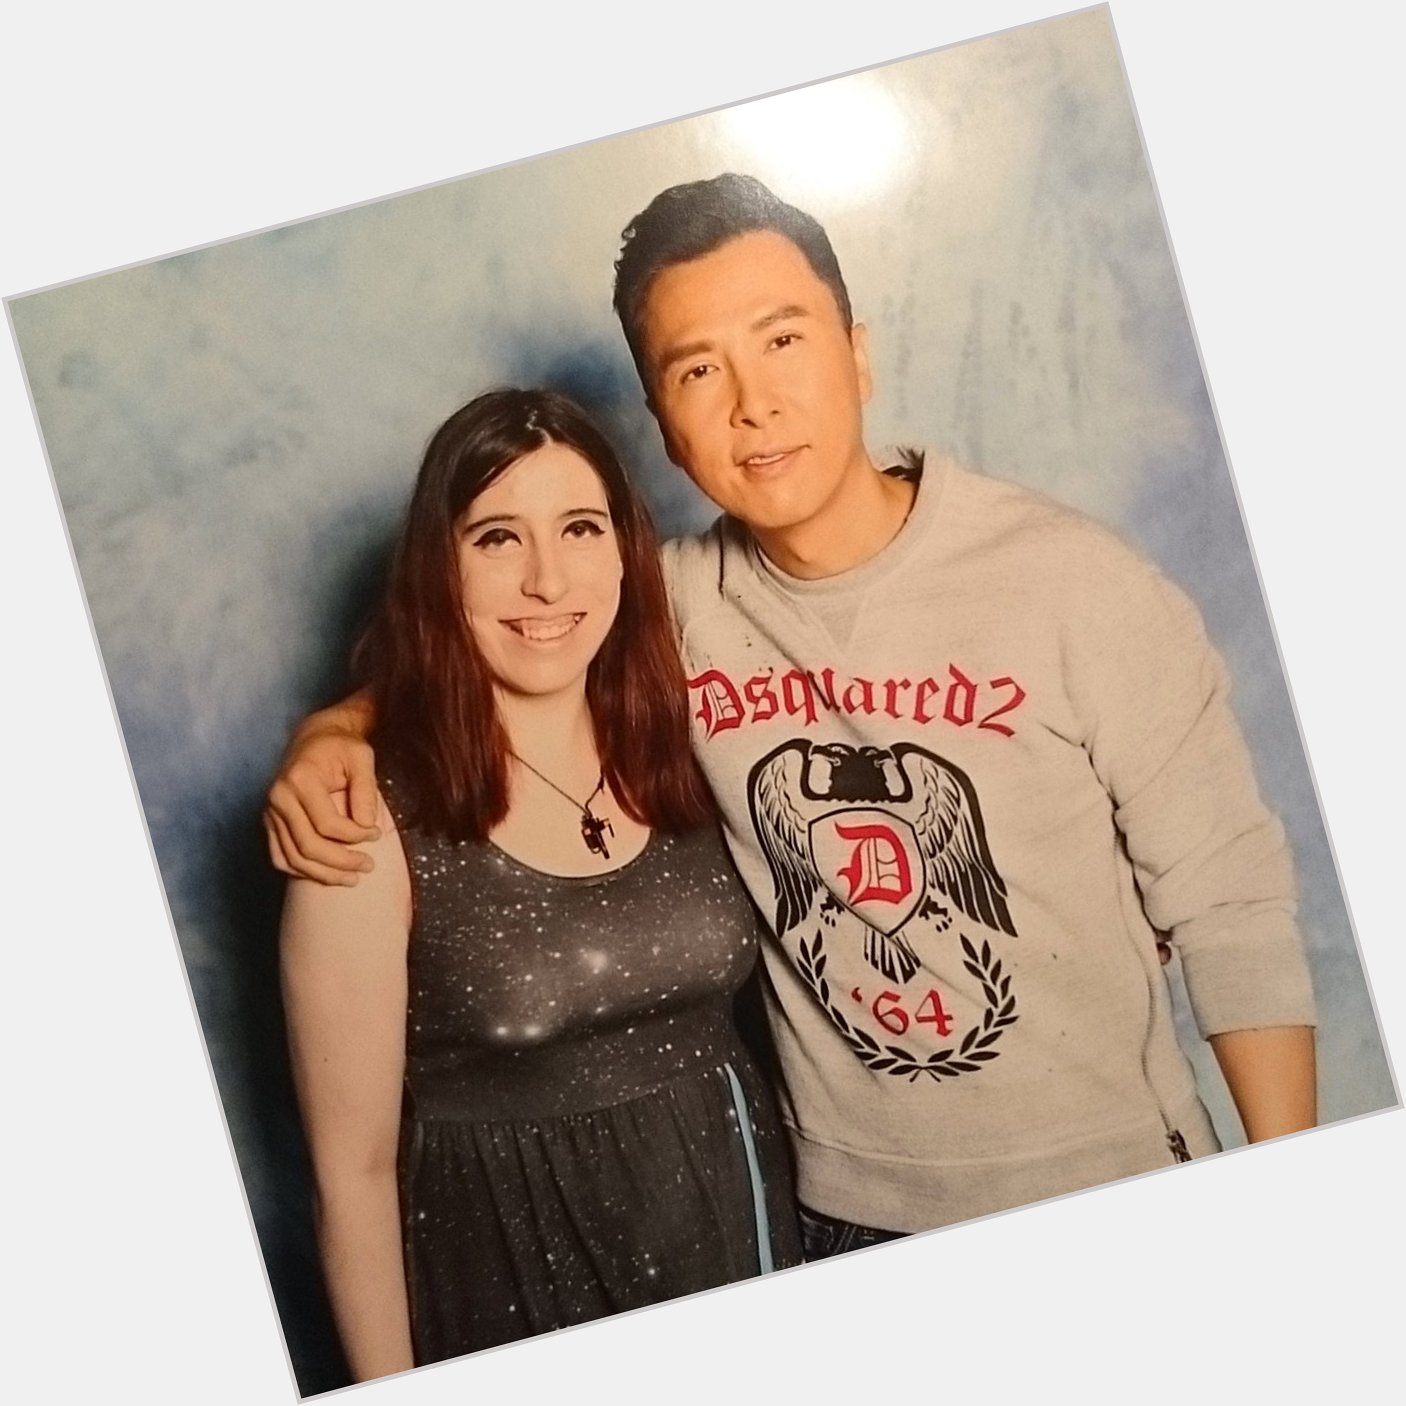 Happy Birthday to Donnie Yen! Thanks for being a sweetie when we met at MCM in May! 